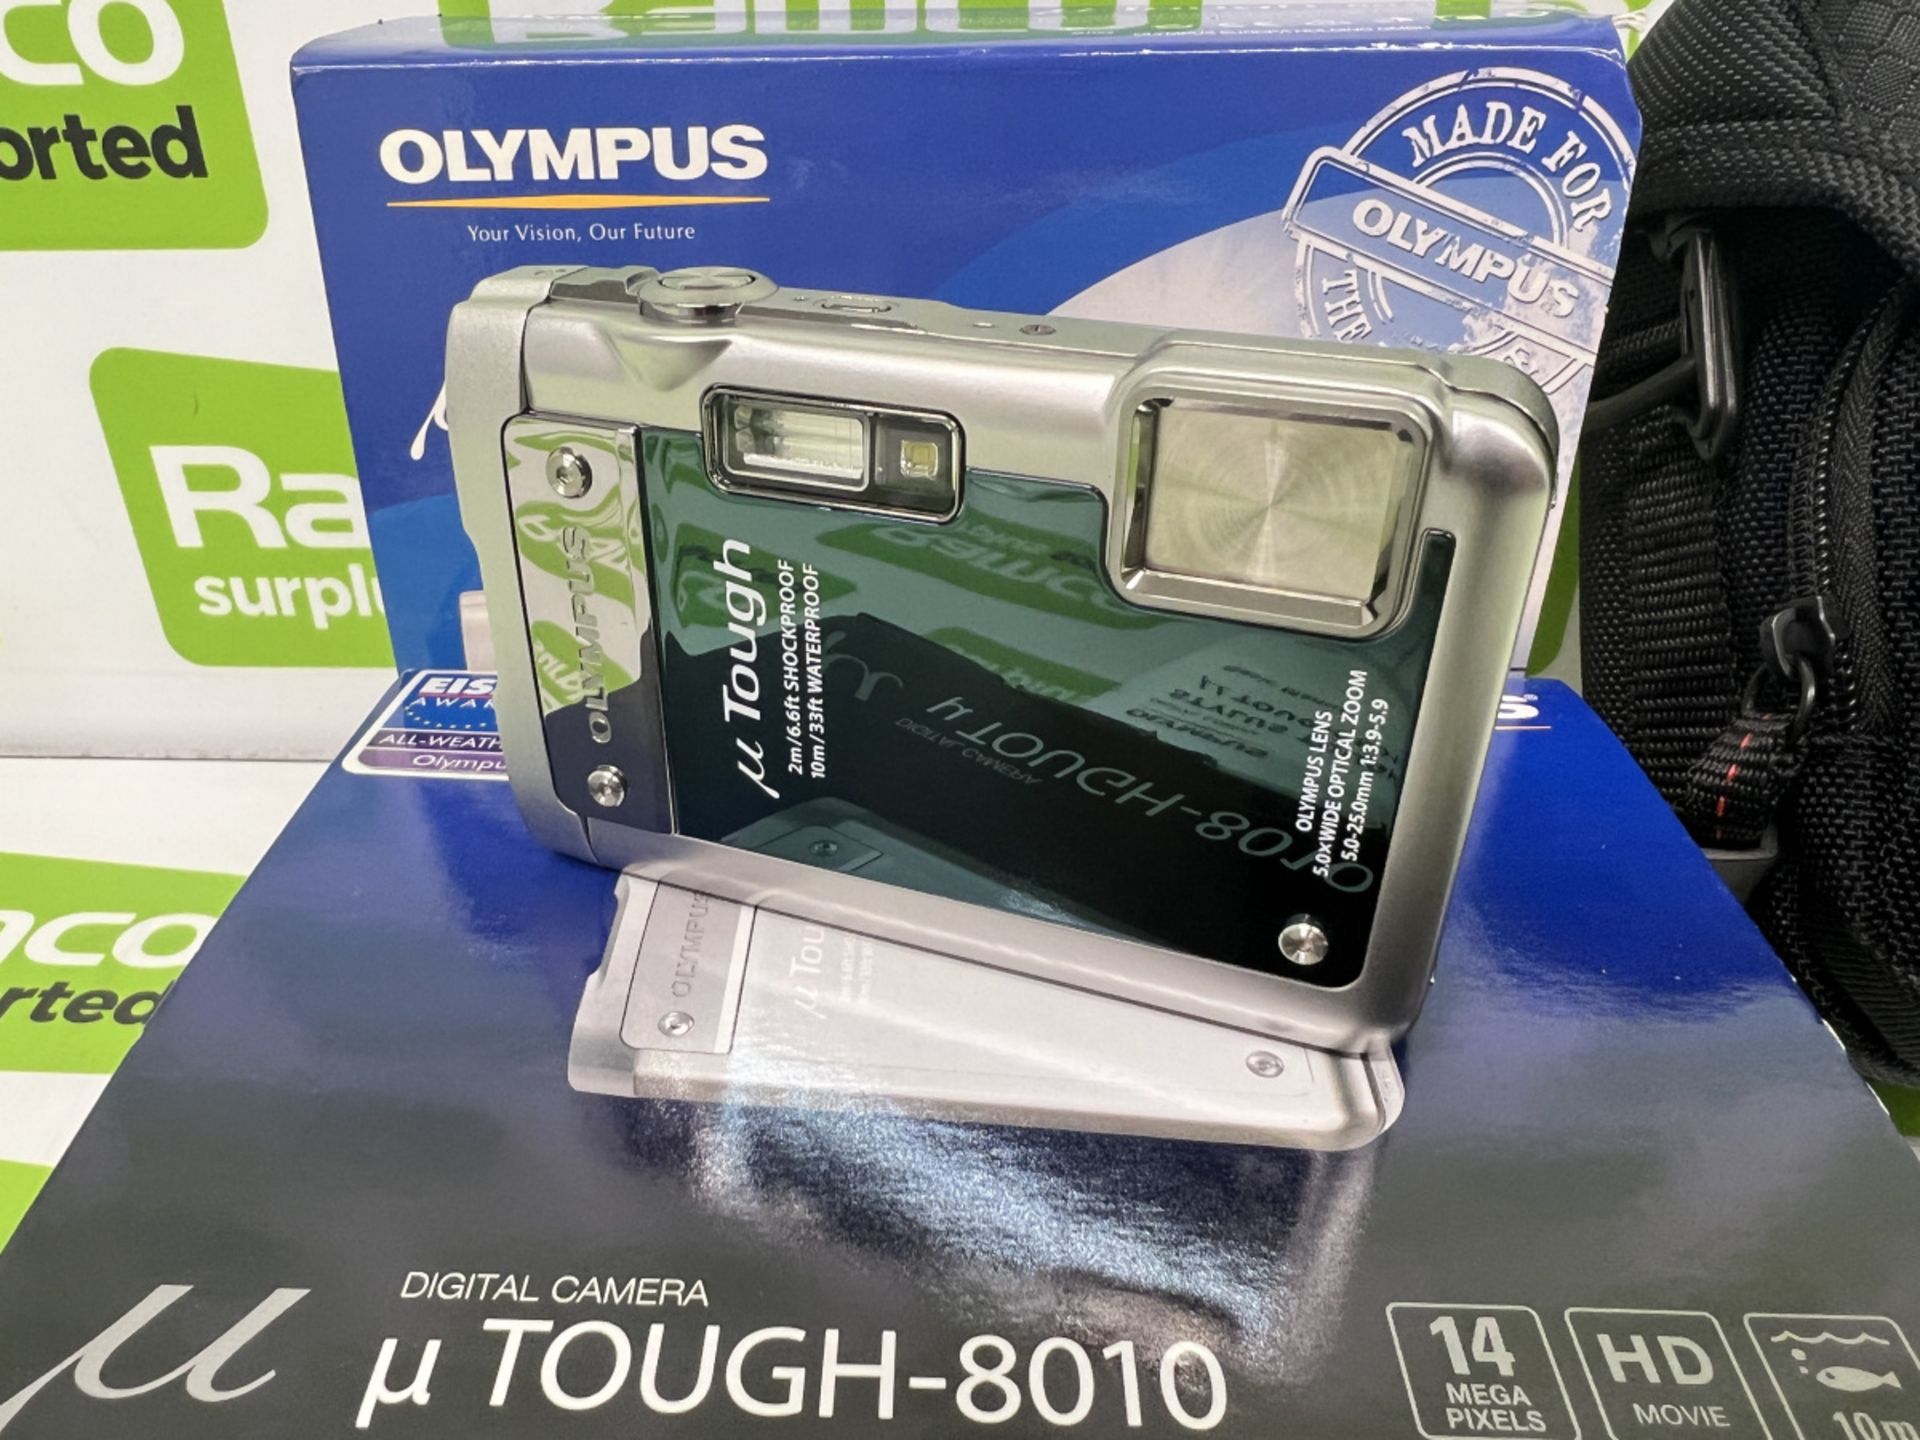 Olympus Stylus Tough-8010 digital camera with Calumet camera pouch - Image 2 of 6